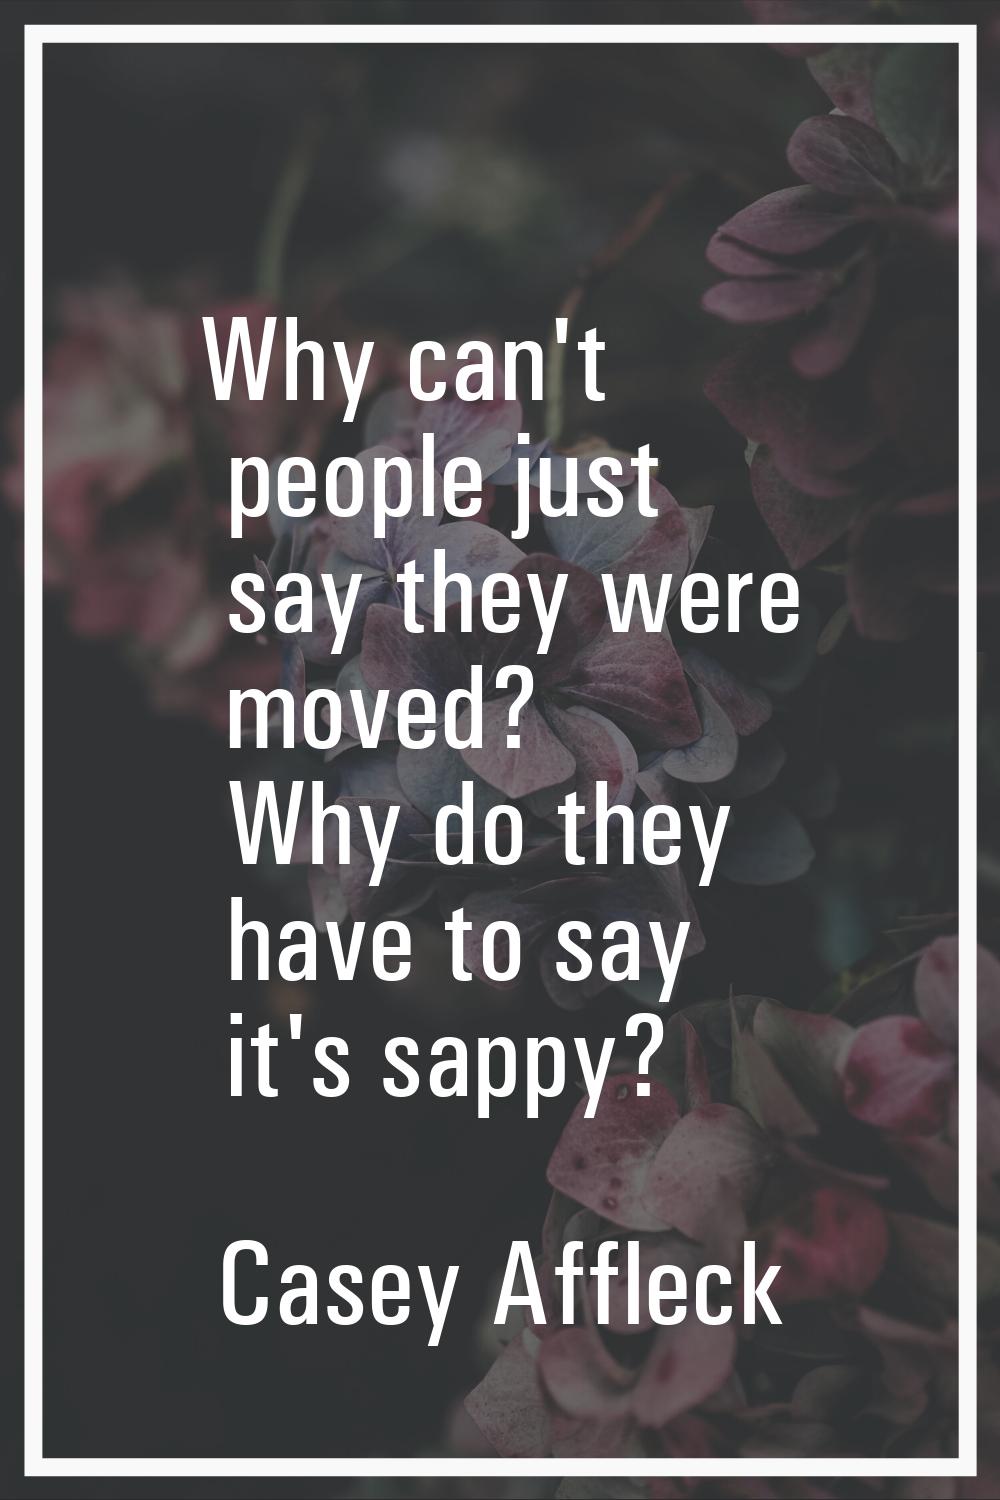 Why can't people just say they were moved? Why do they have to say it's sappy?